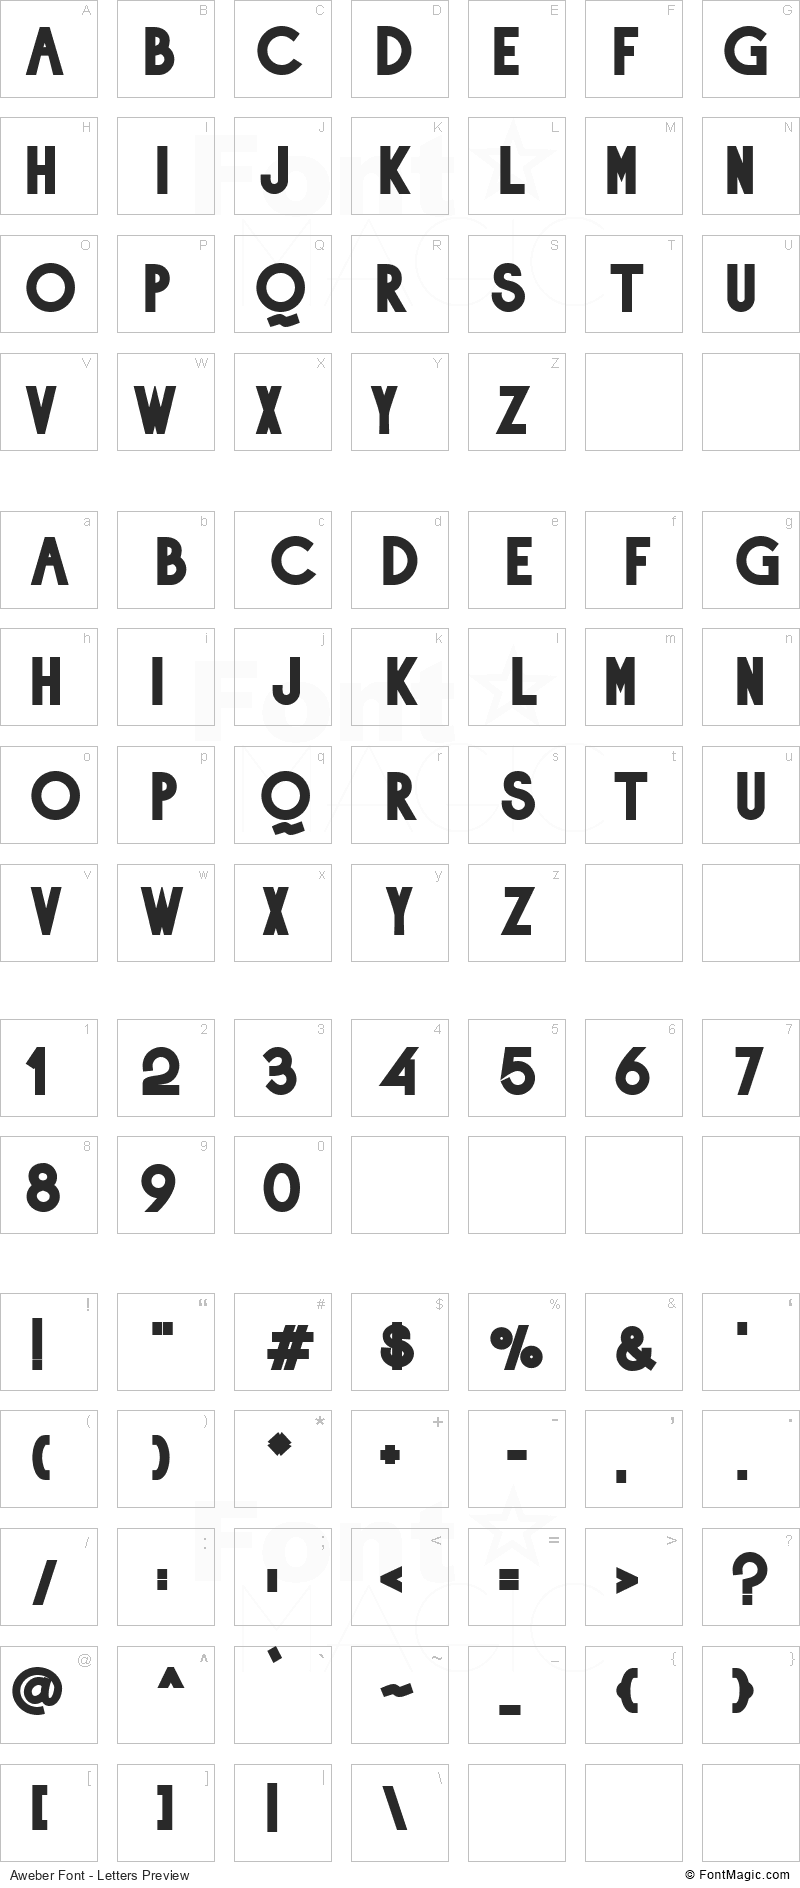 Aweber Font - All Latters Preview Chart